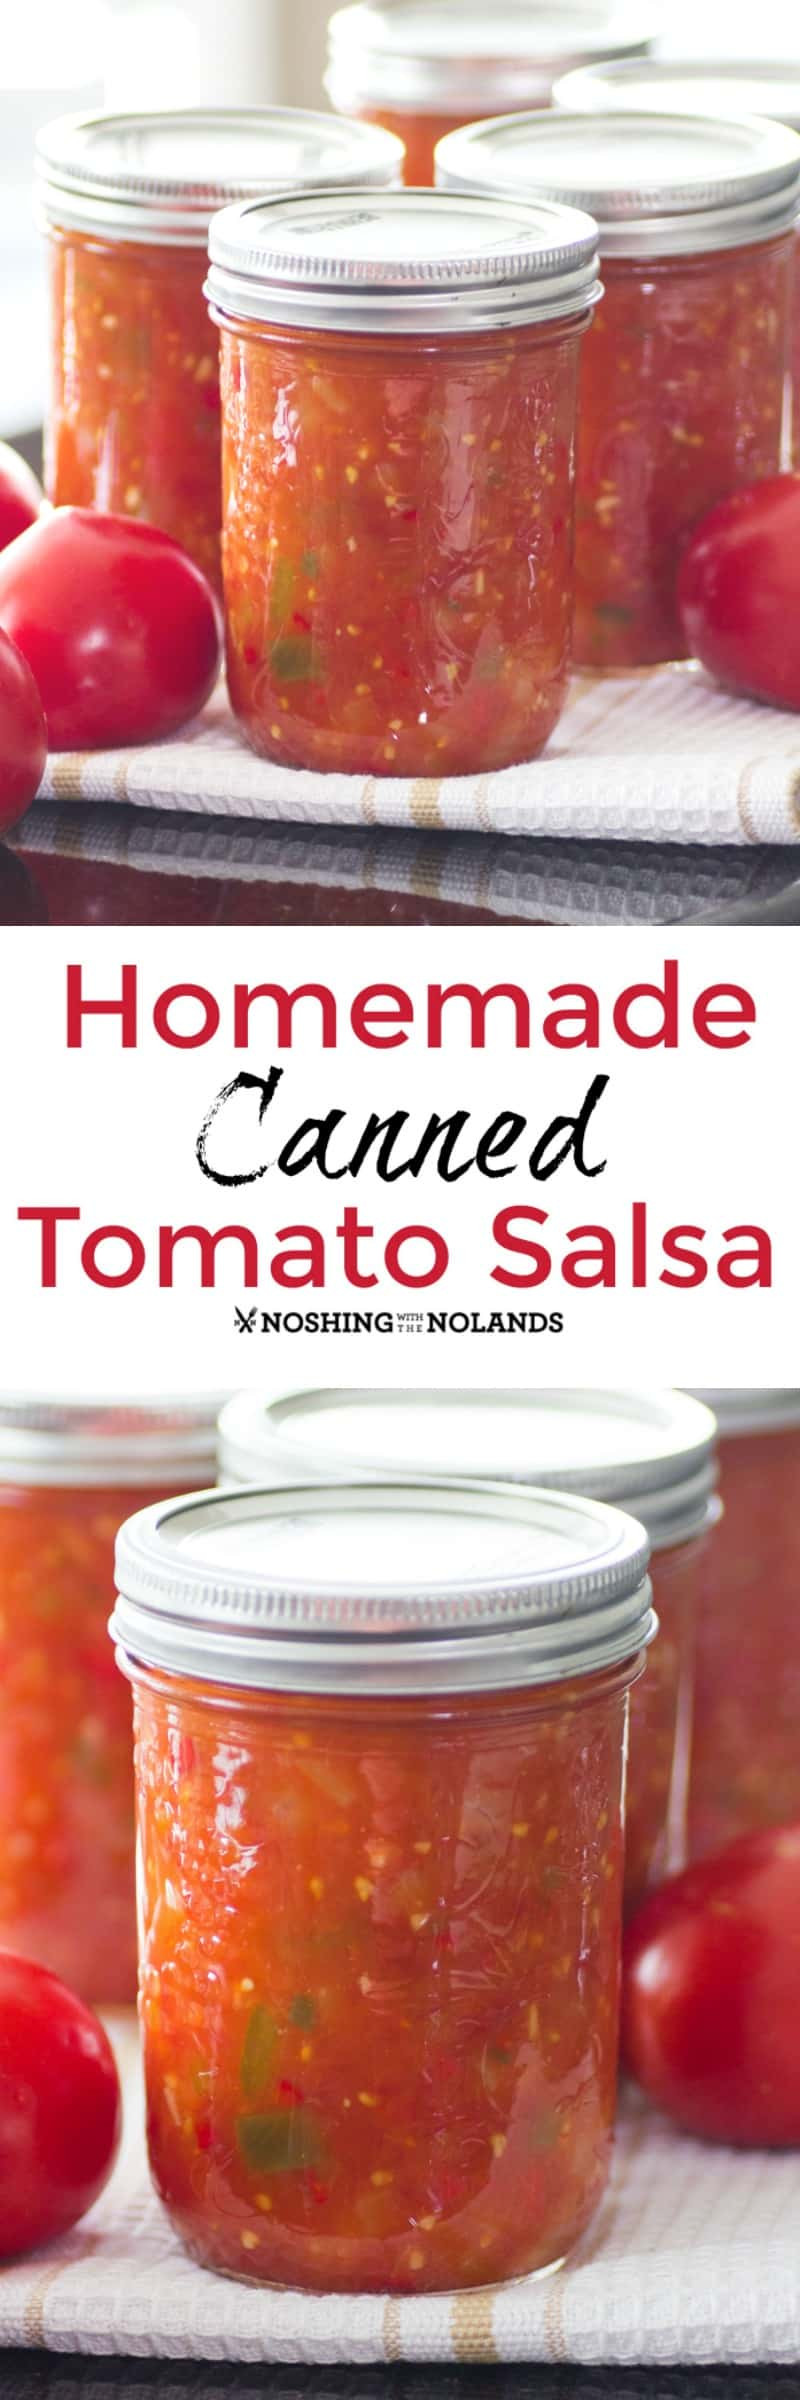 Home Canned Salsa Recipe
 Homemade Canned Tomato Salsa is the best with fresh summer